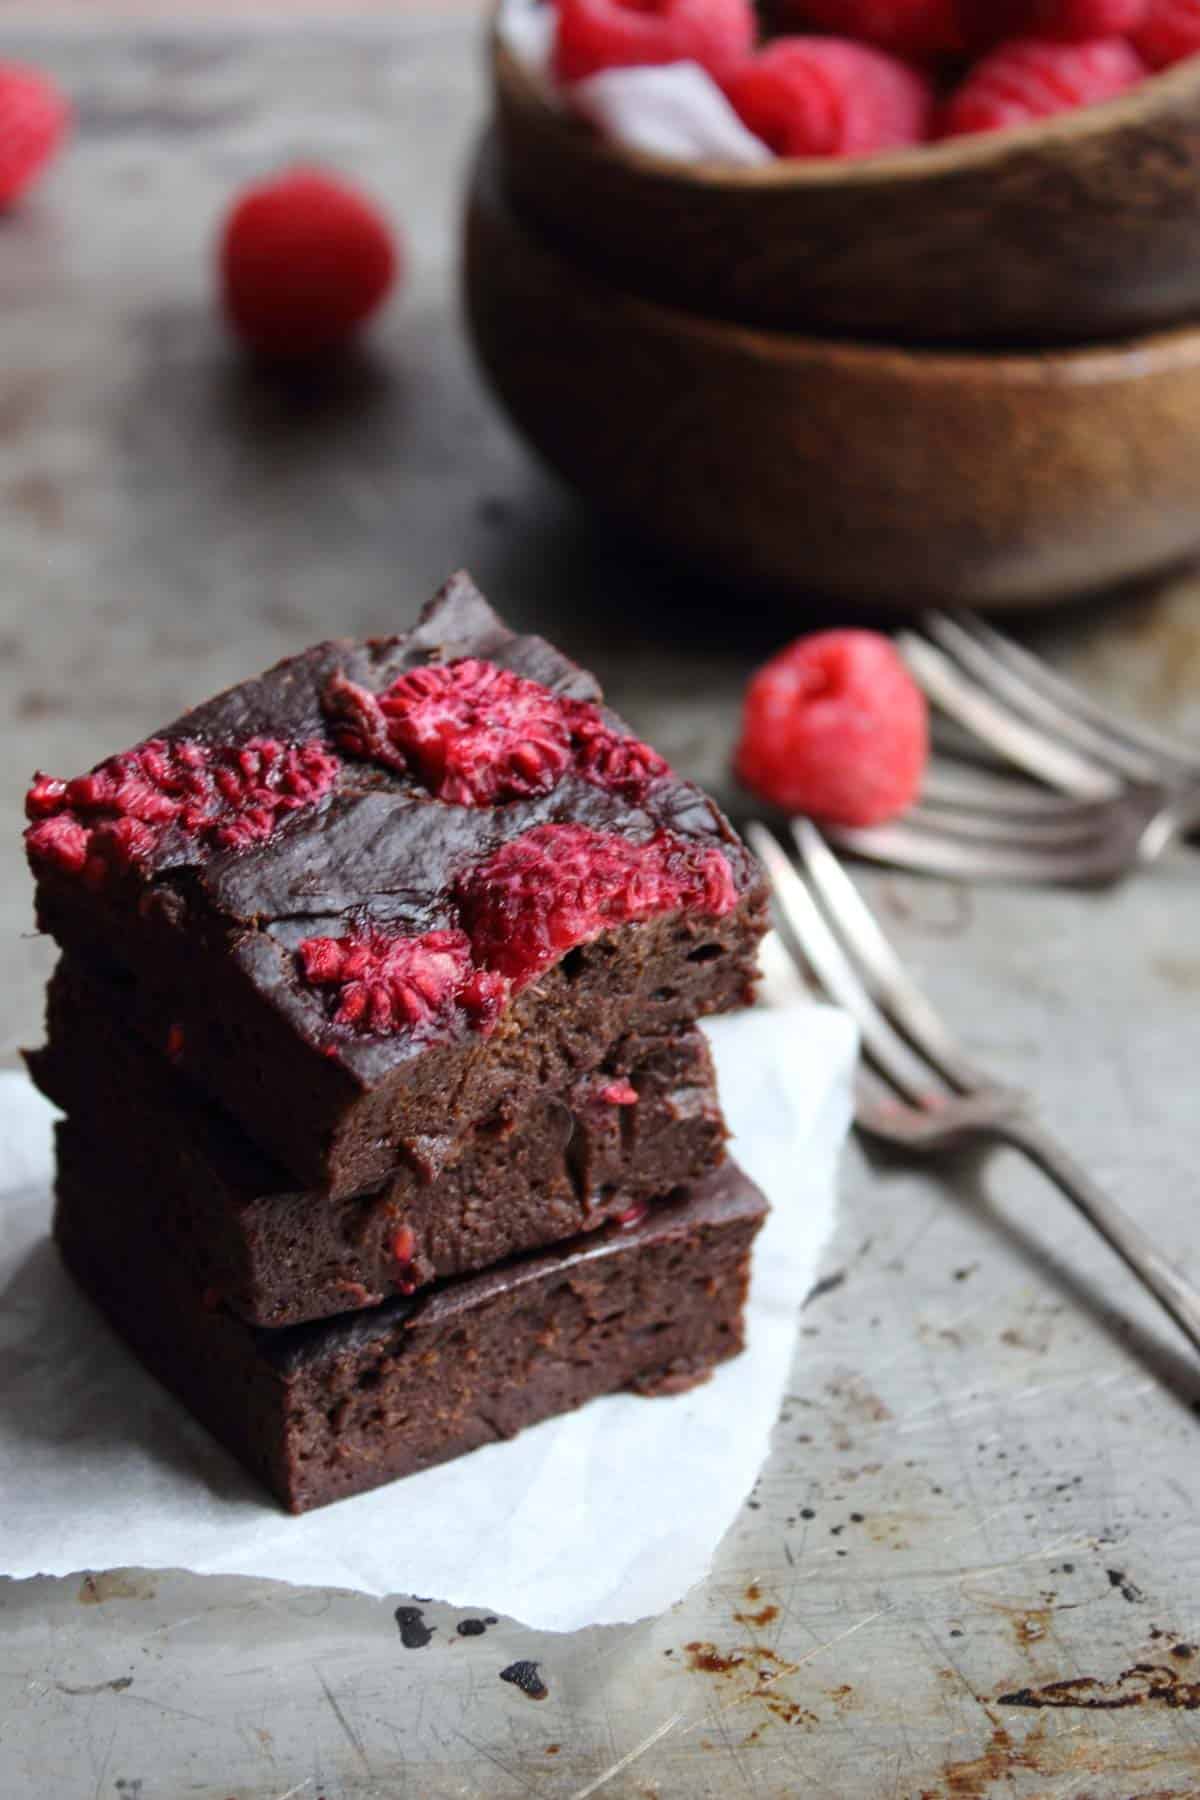 chocolate brownies stacked on a baking tray with raspberries.